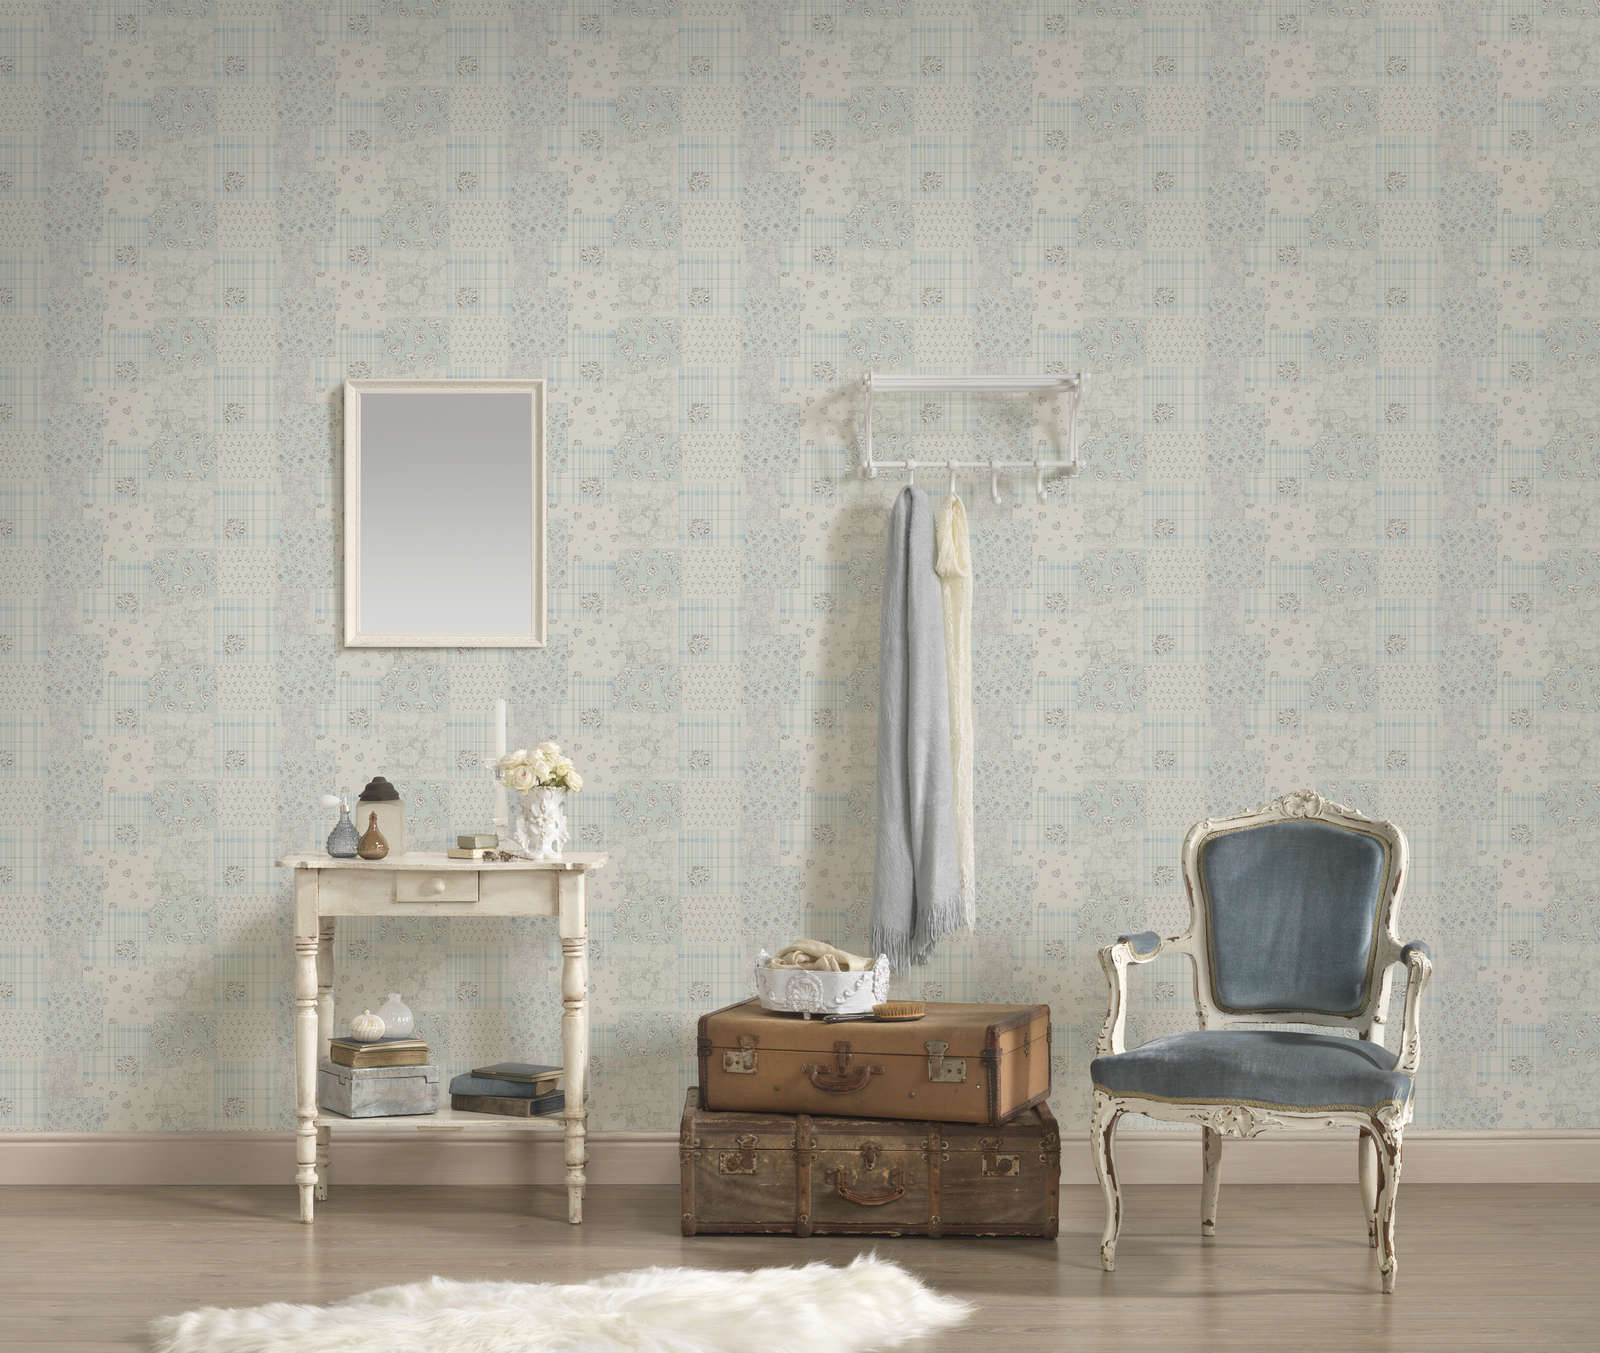             Non-woven wallpaper floral pattern and checkered country style - light blue, grey, white
        